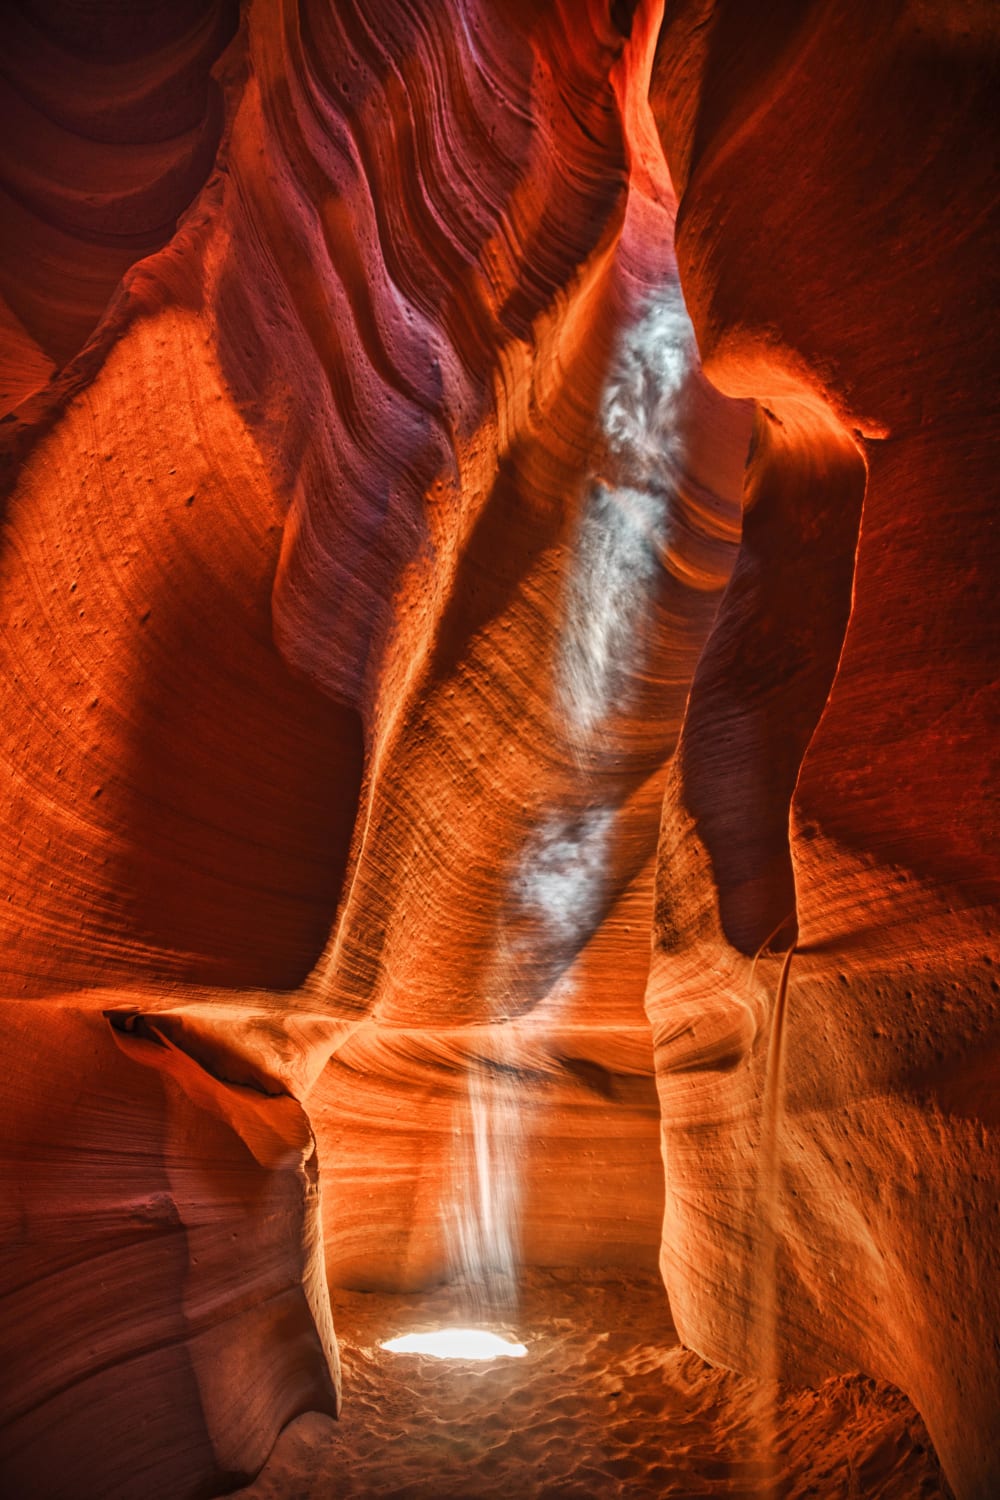 ITAP a picture of Antelope Canyon "finger of god"